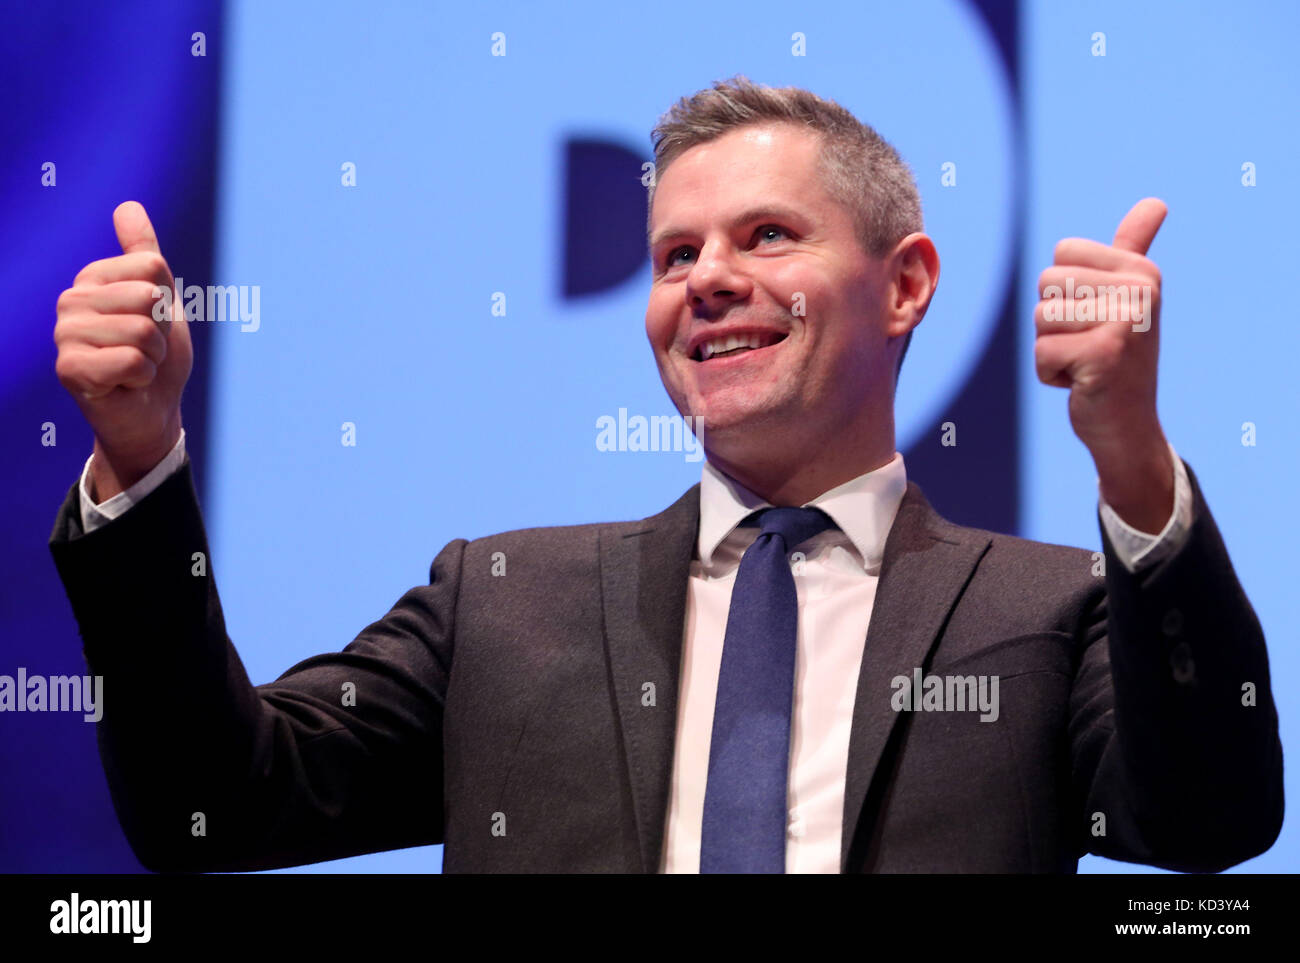 Cabinet Secretary for Finance Derek Mackay after addressing delegates at the Scottish National Party conference at the SEC Centre in Glasgow. Stock Photo